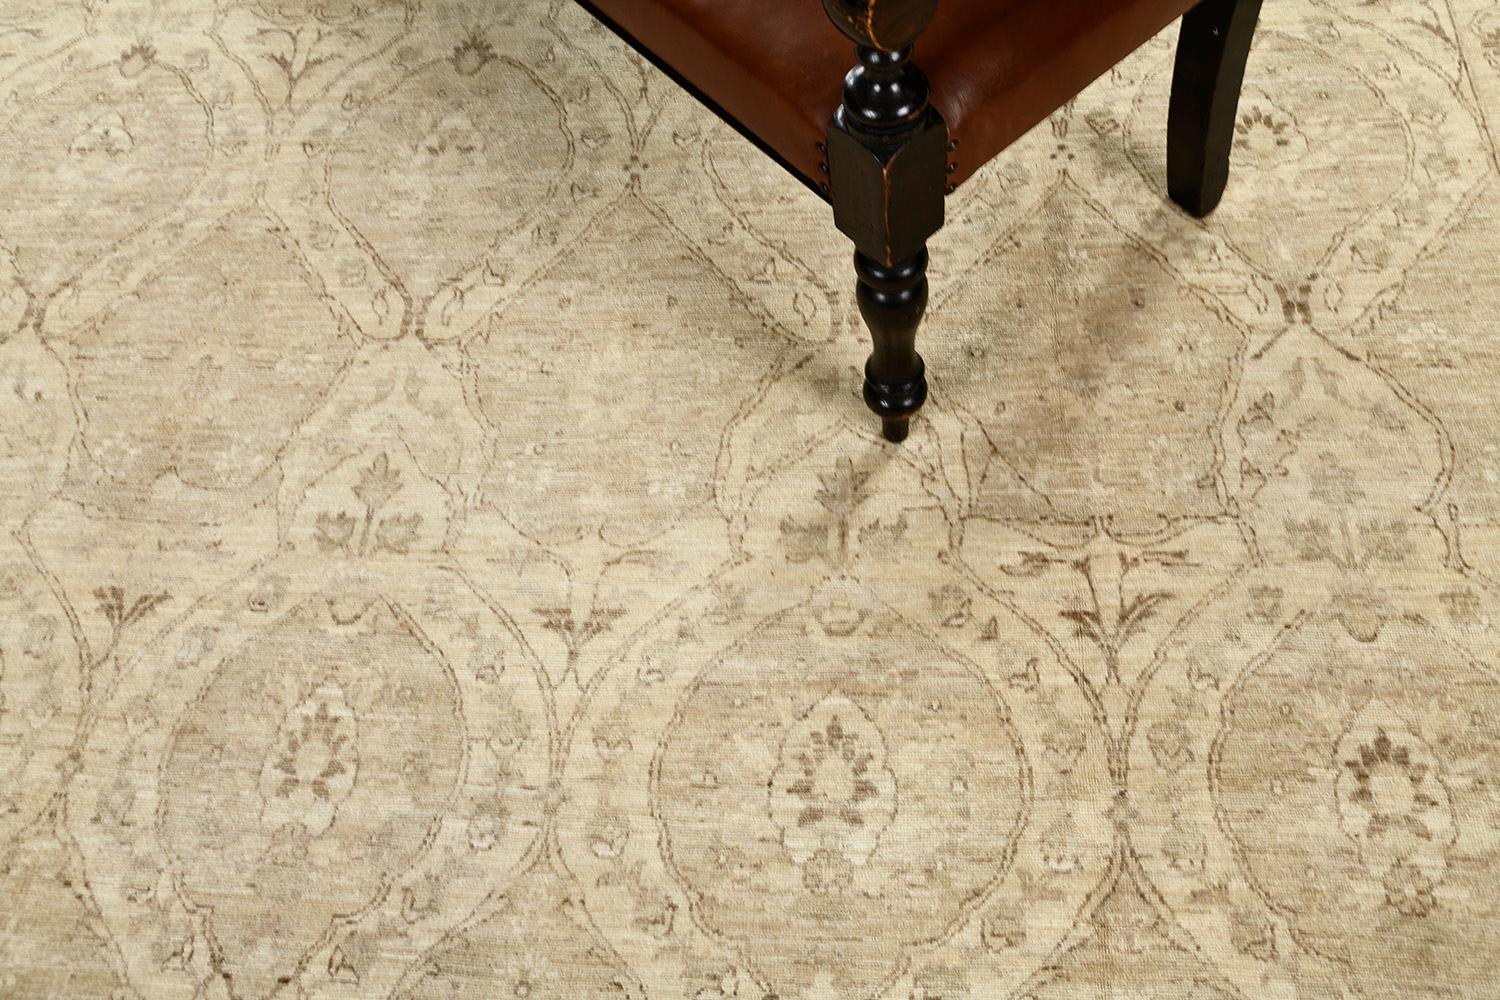 A gorgeous Tabriz revival rug that exudes its natural brilliance. The allover leafy botanical compartmental design highlights its elements within as it unravels throughout this sophisticated rug. Muted and neutral tones of ivory and gray creates an